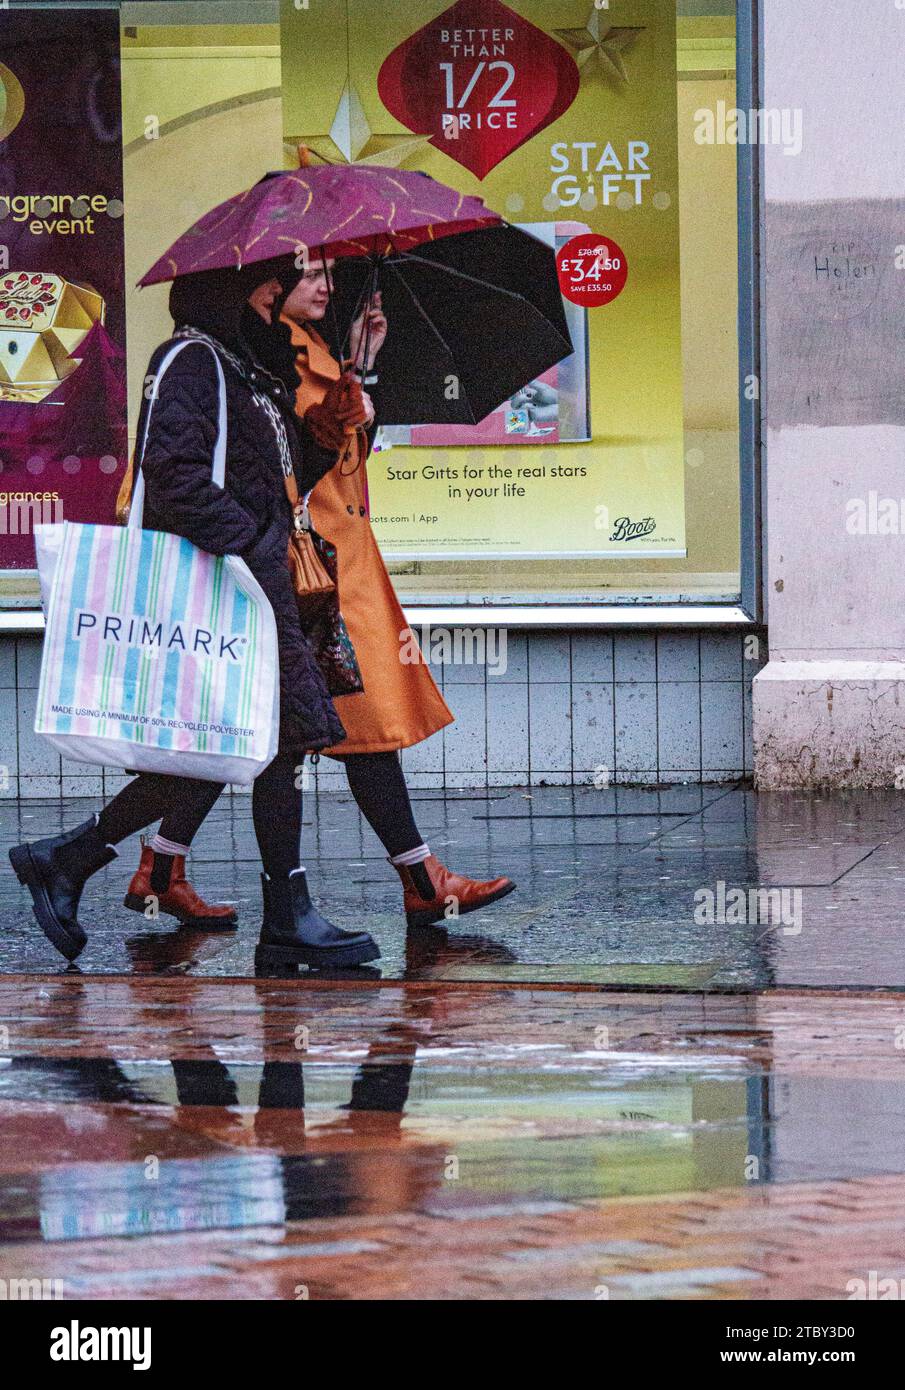 Dundee, Tayside, Scotland, UK. 9th Dec, 2023. UK Weather: A rain warning is in effect as heavy rain continues to keep falling across Northeast Scotland. Dundee locals go Christmas shopping in the city centre over the weekend, wrapped up against the bitter cold and torrential downpours. Credit: Dundee Photographics/Alamy Live News Stock Photo